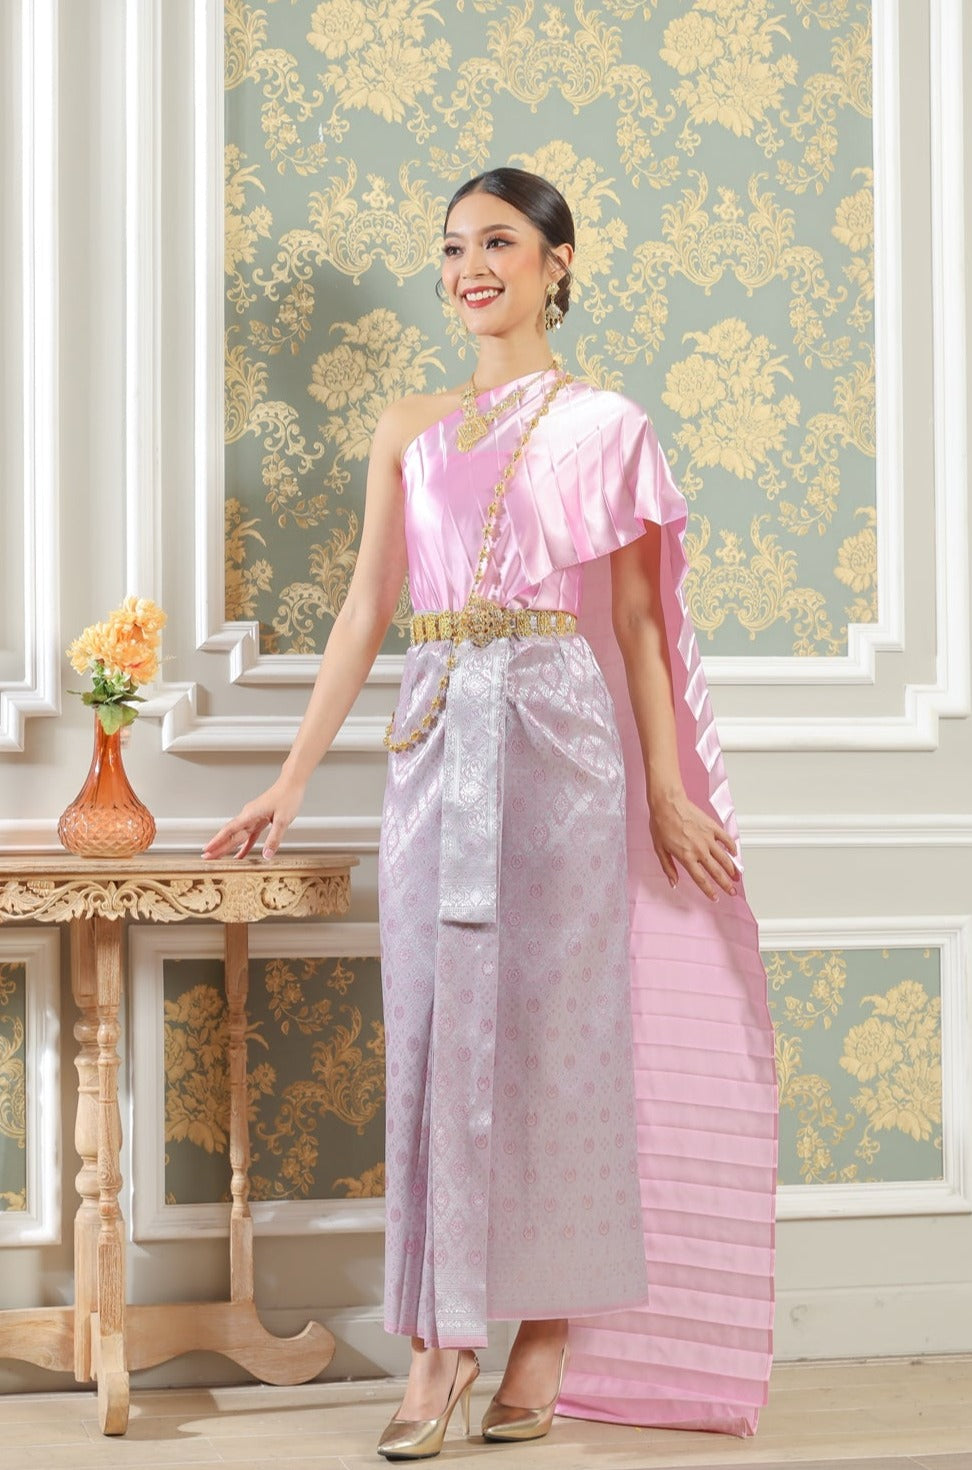 A sweet pink Thai traditional dress.